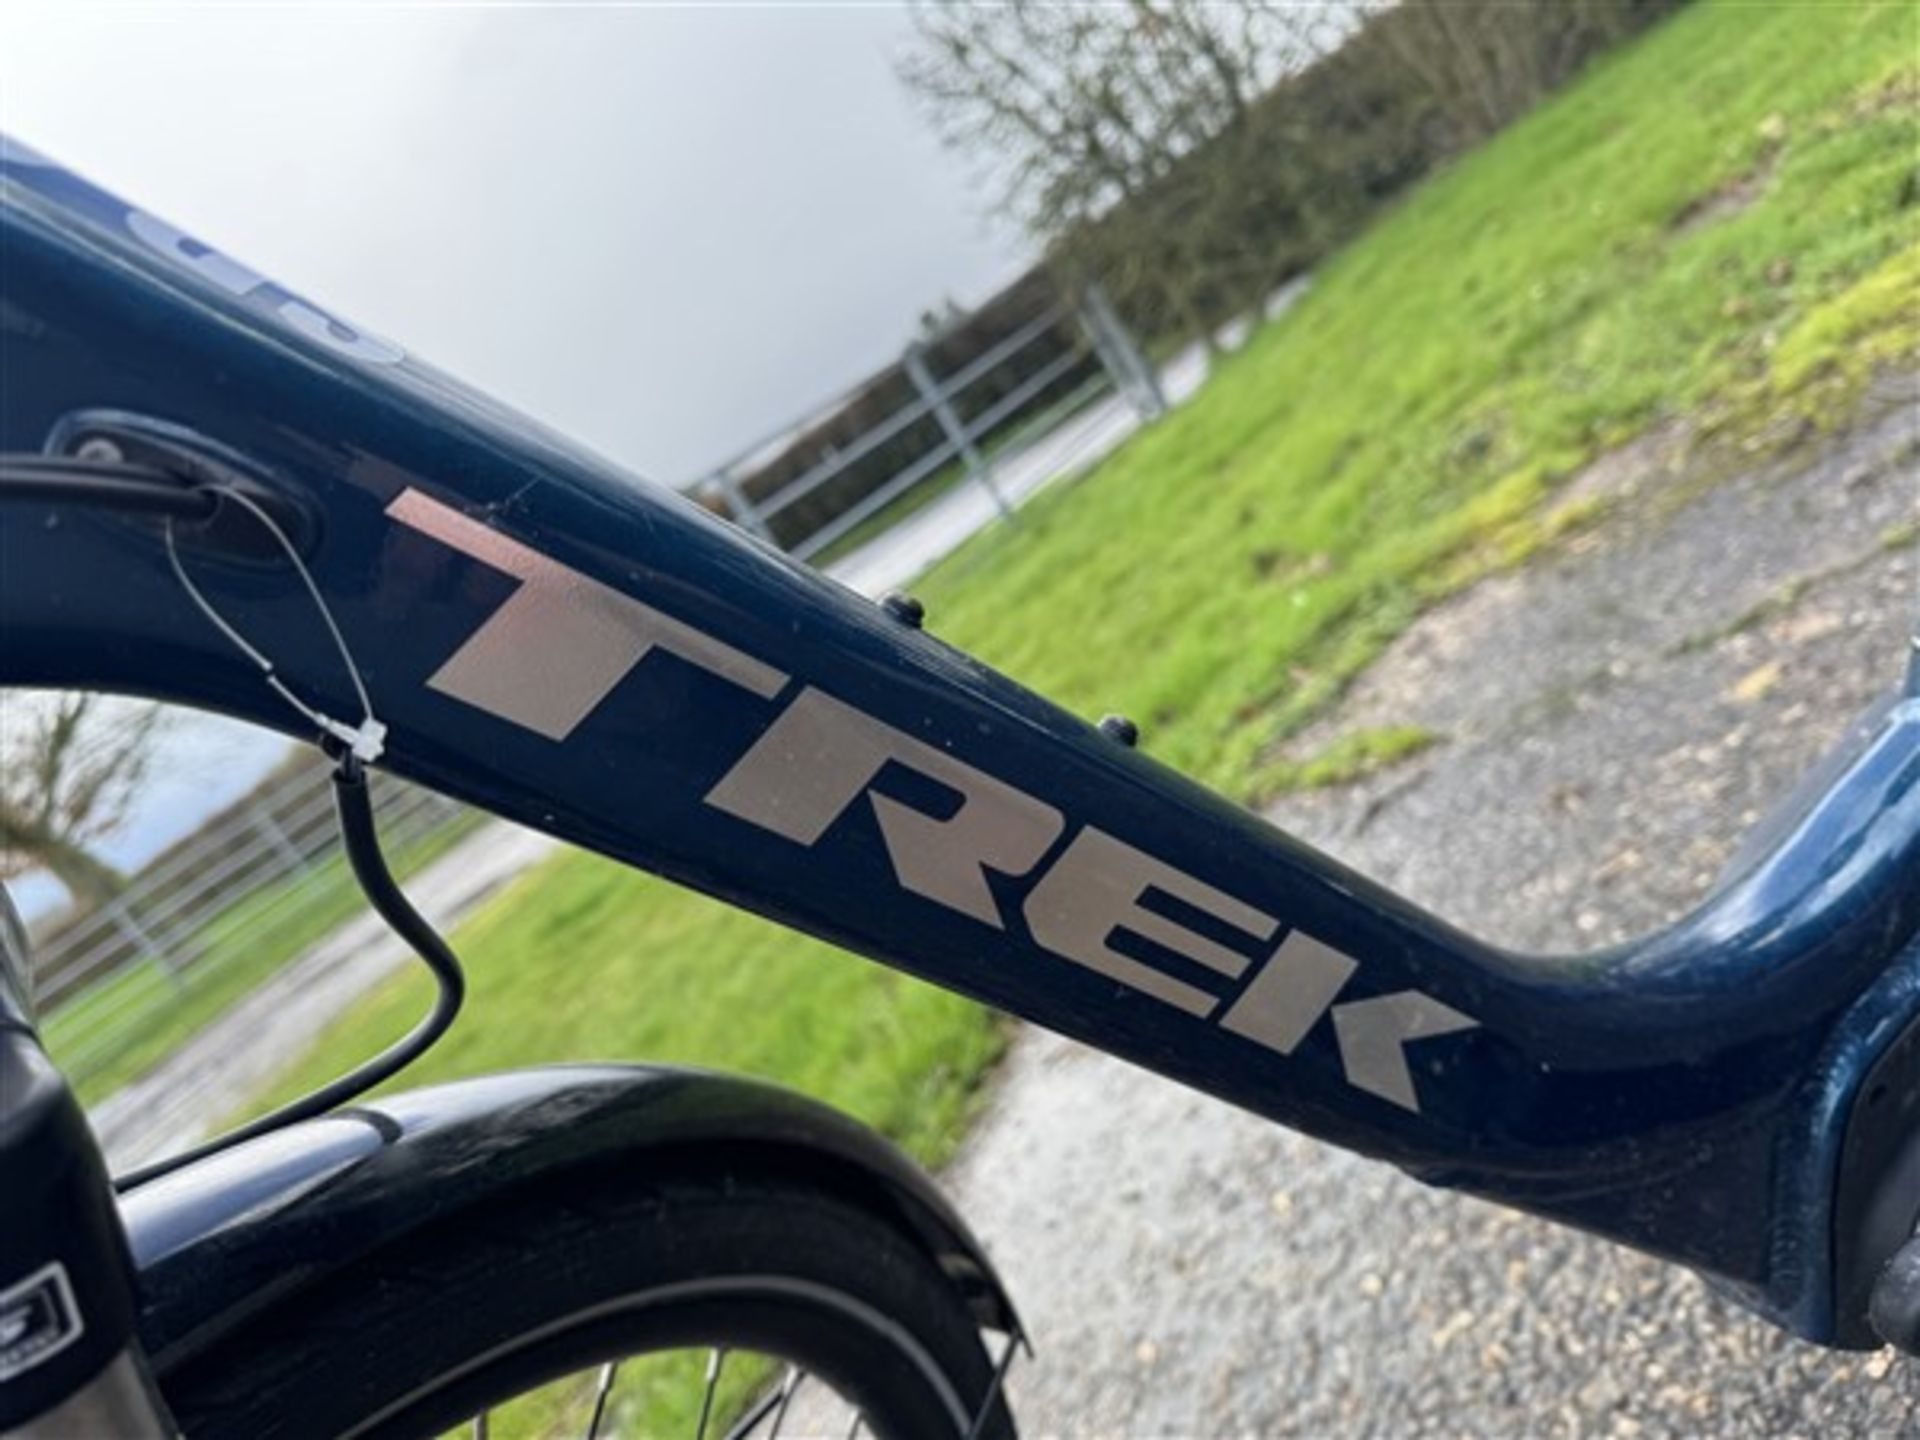 Trek Verve +1 electric bike with rear bag holder and Bosch display, tyre size 28 x 2.00 (no - Image 2 of 8